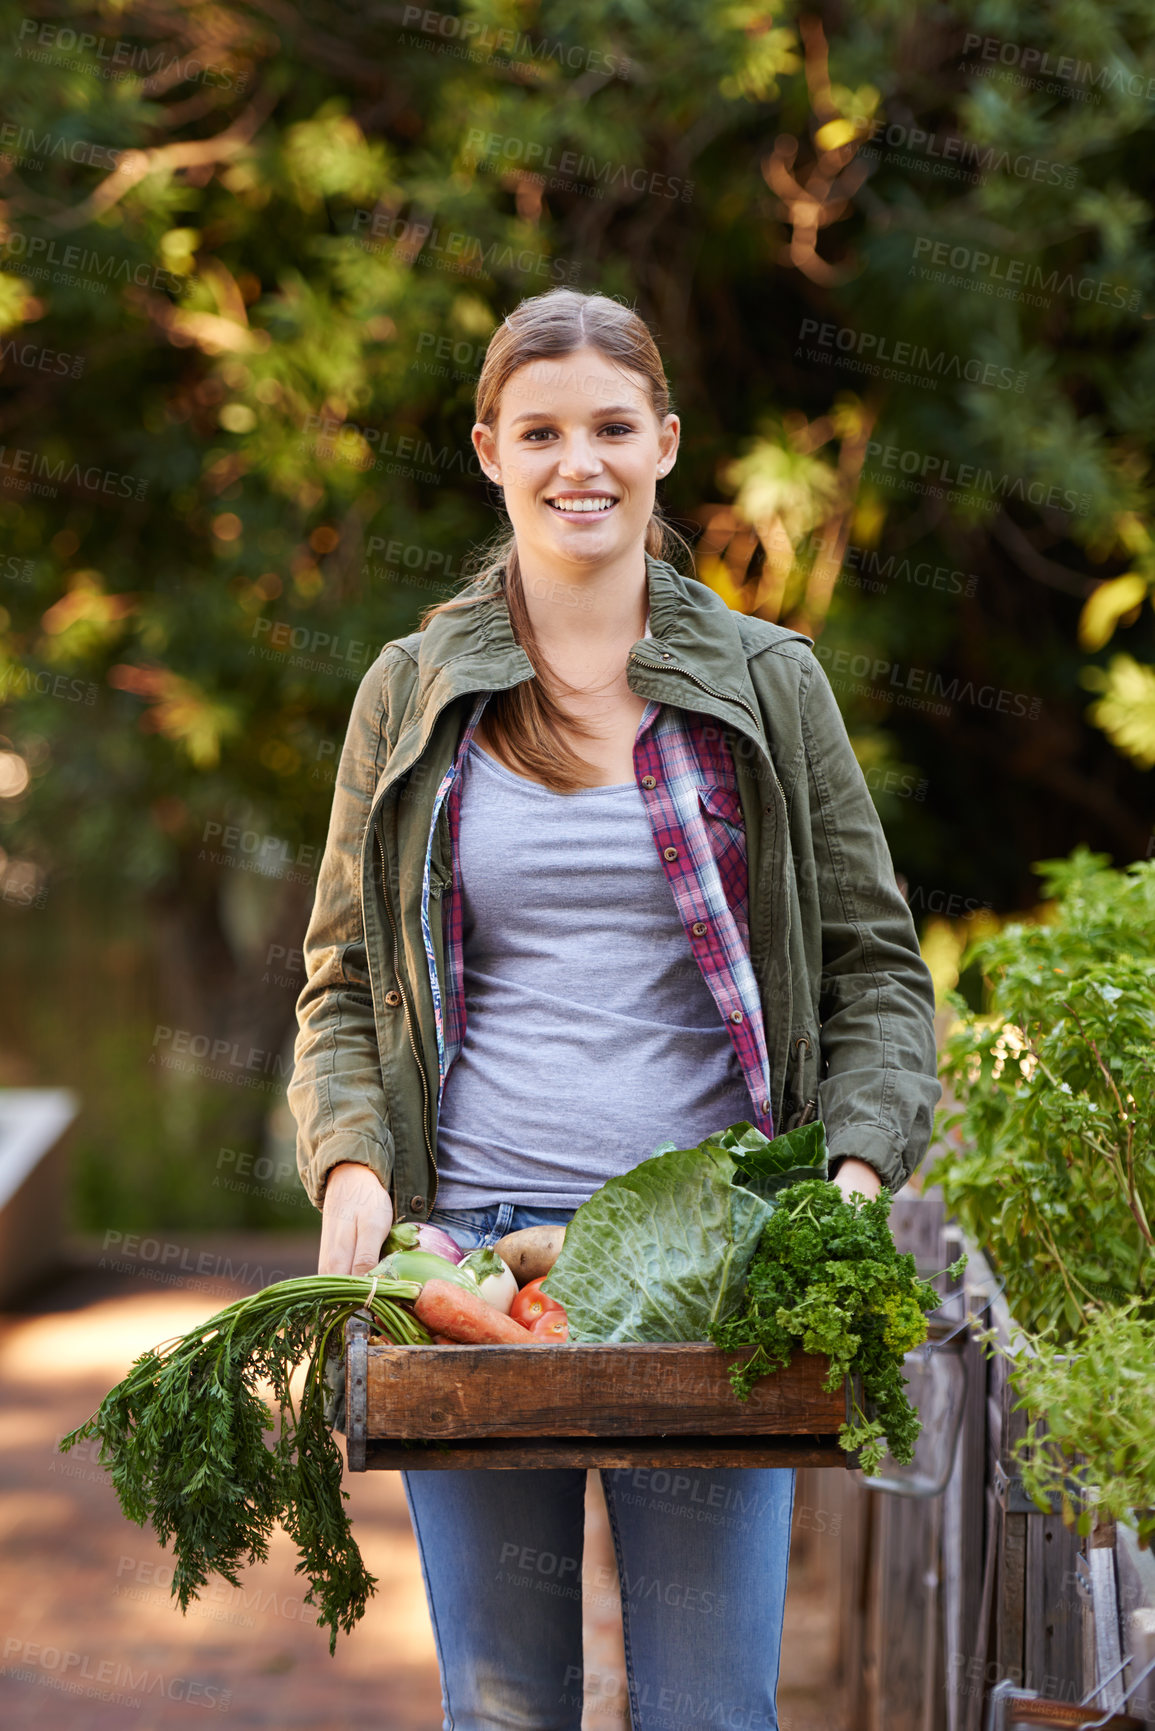 Buy stock photo Portrait of a happy young woman holding a crate full of freshly picked vegetables